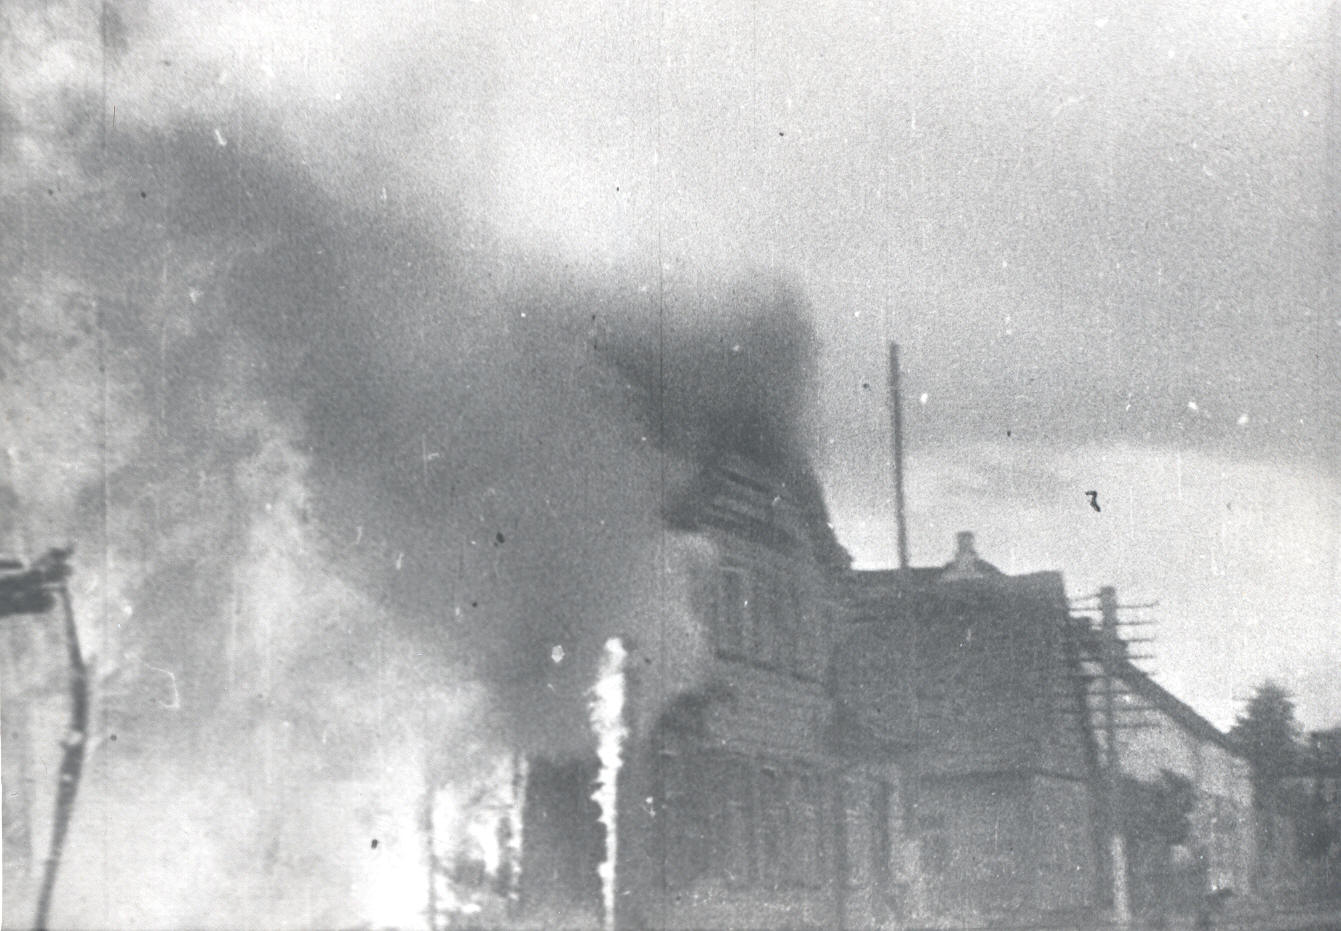 Photo. Release of Võru in 1944. August. Burning the city.